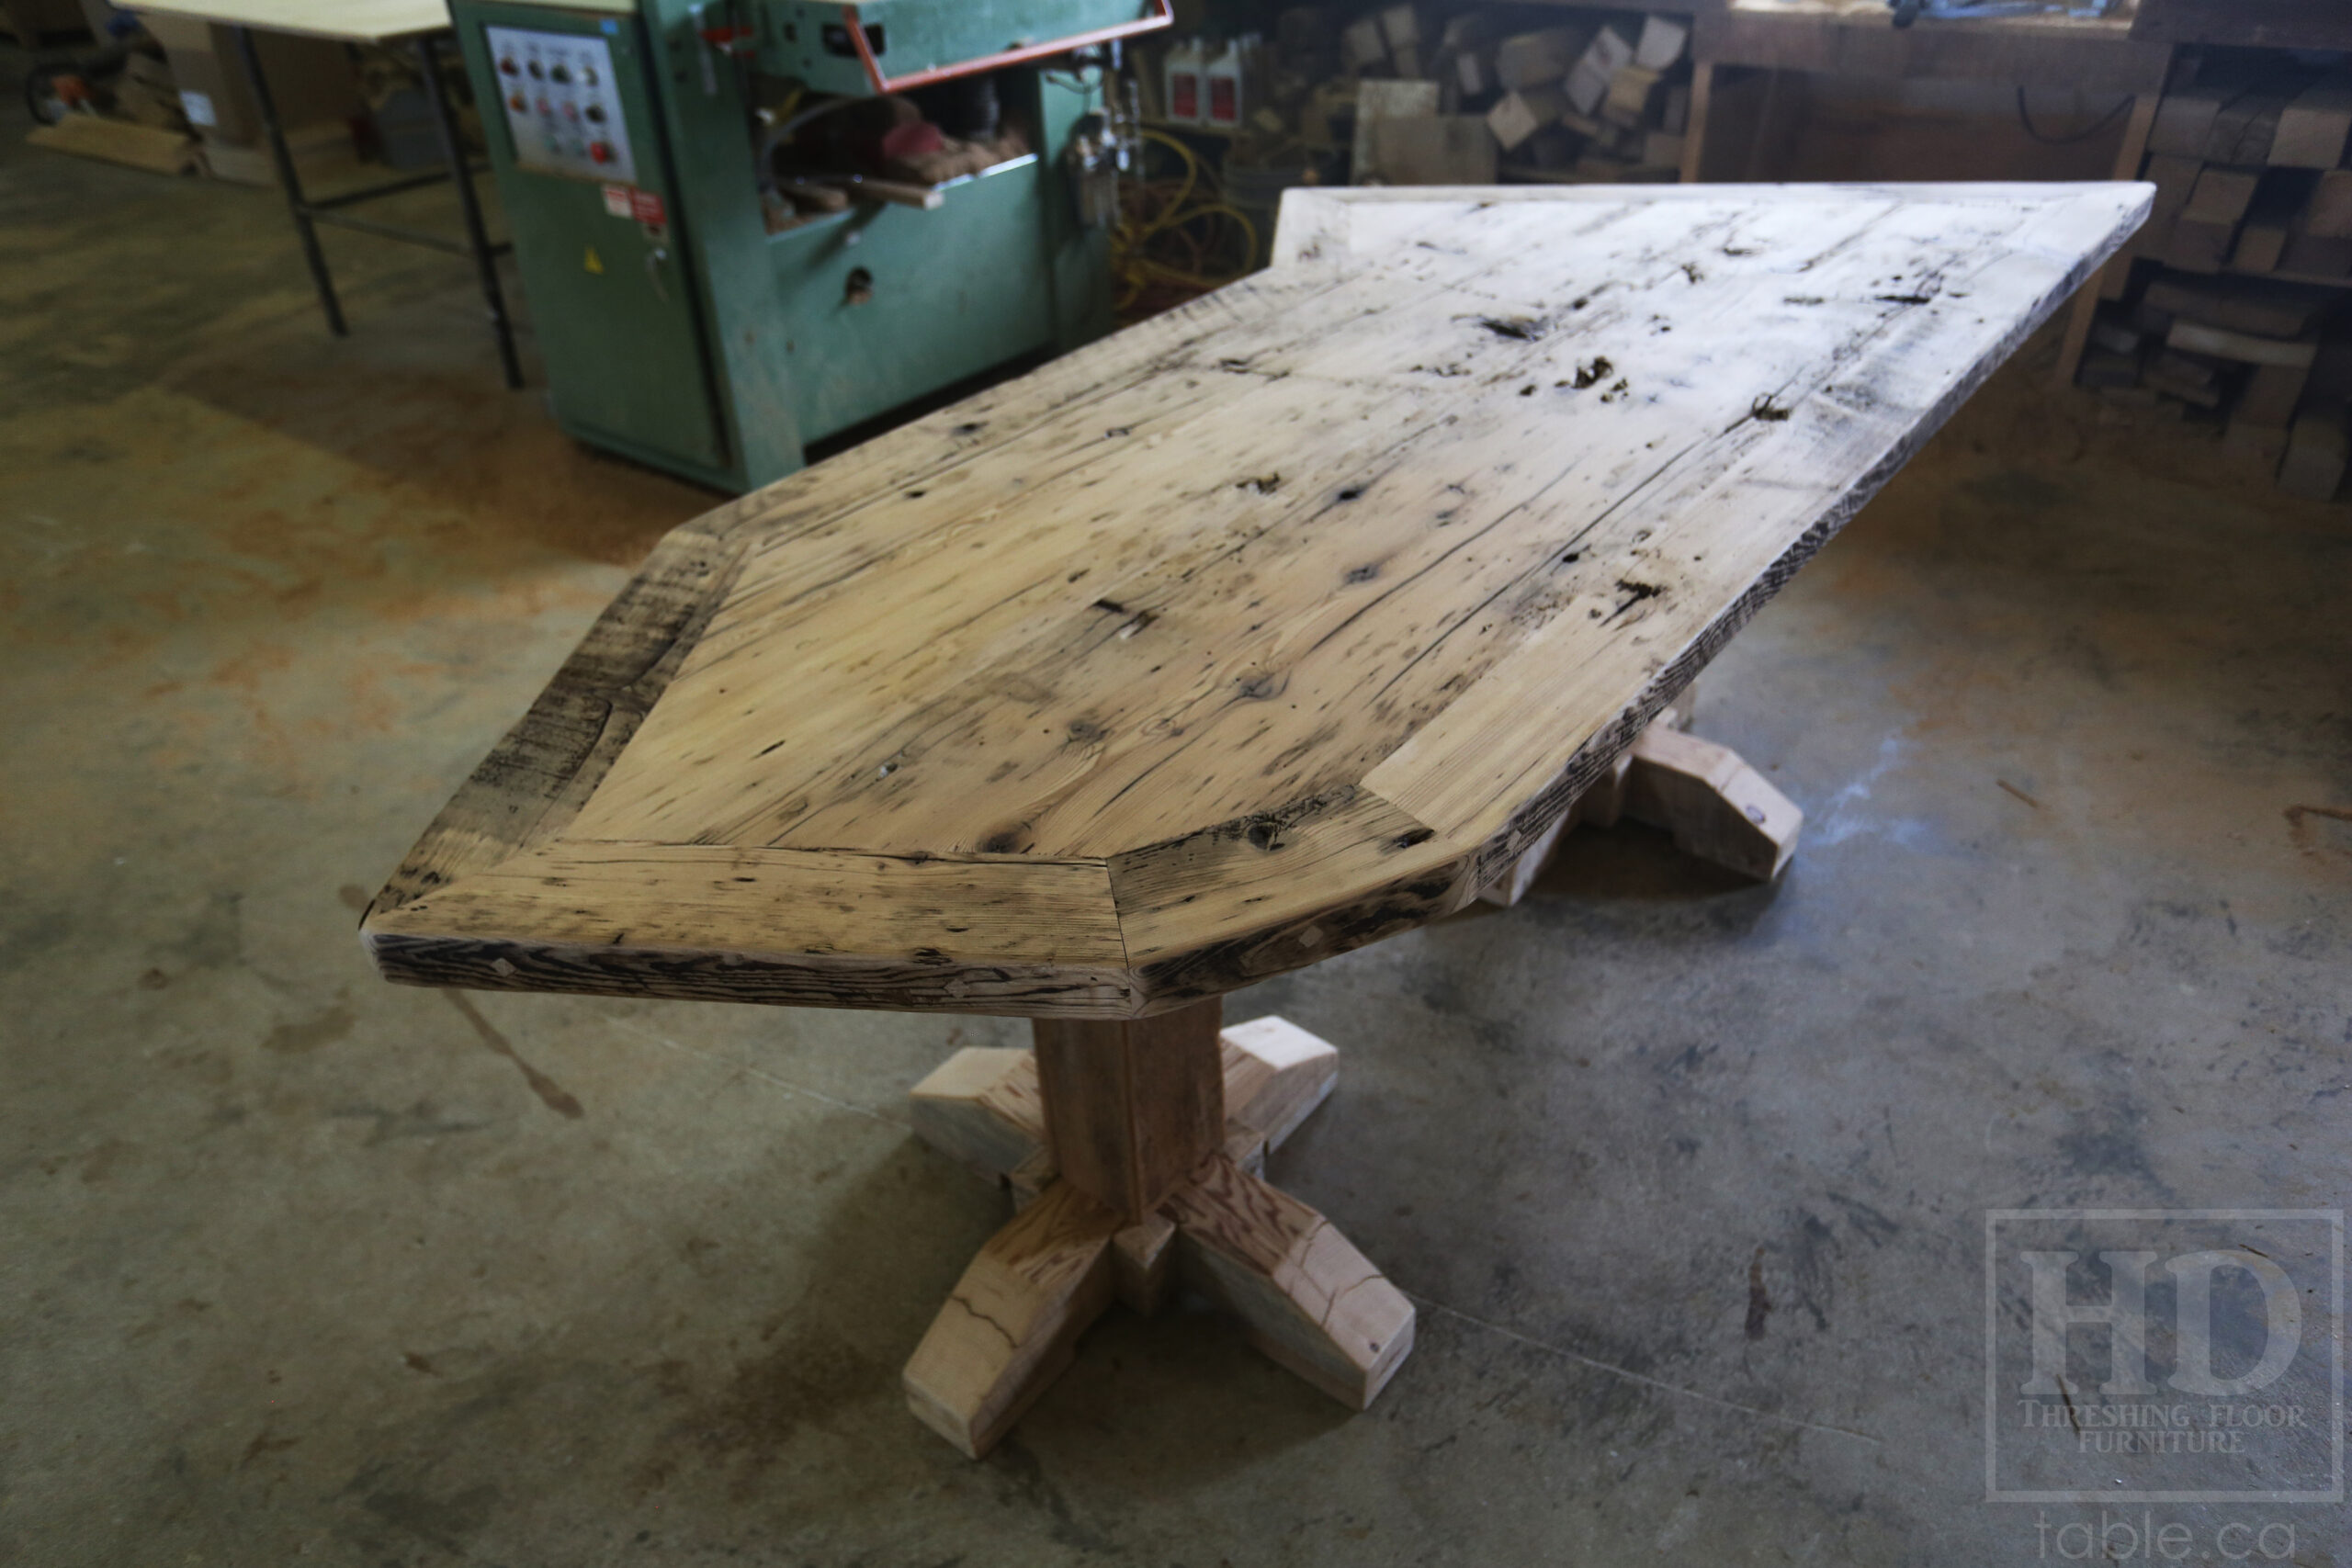 Custom Ontario Barnwood Desk – Barn Beam Posts – Modified Shape to Accommodate a Unique Space -Reclaimed Hemlock Threshing Floor 2” Top – Original edges & distressing maintained  – www.table.ca